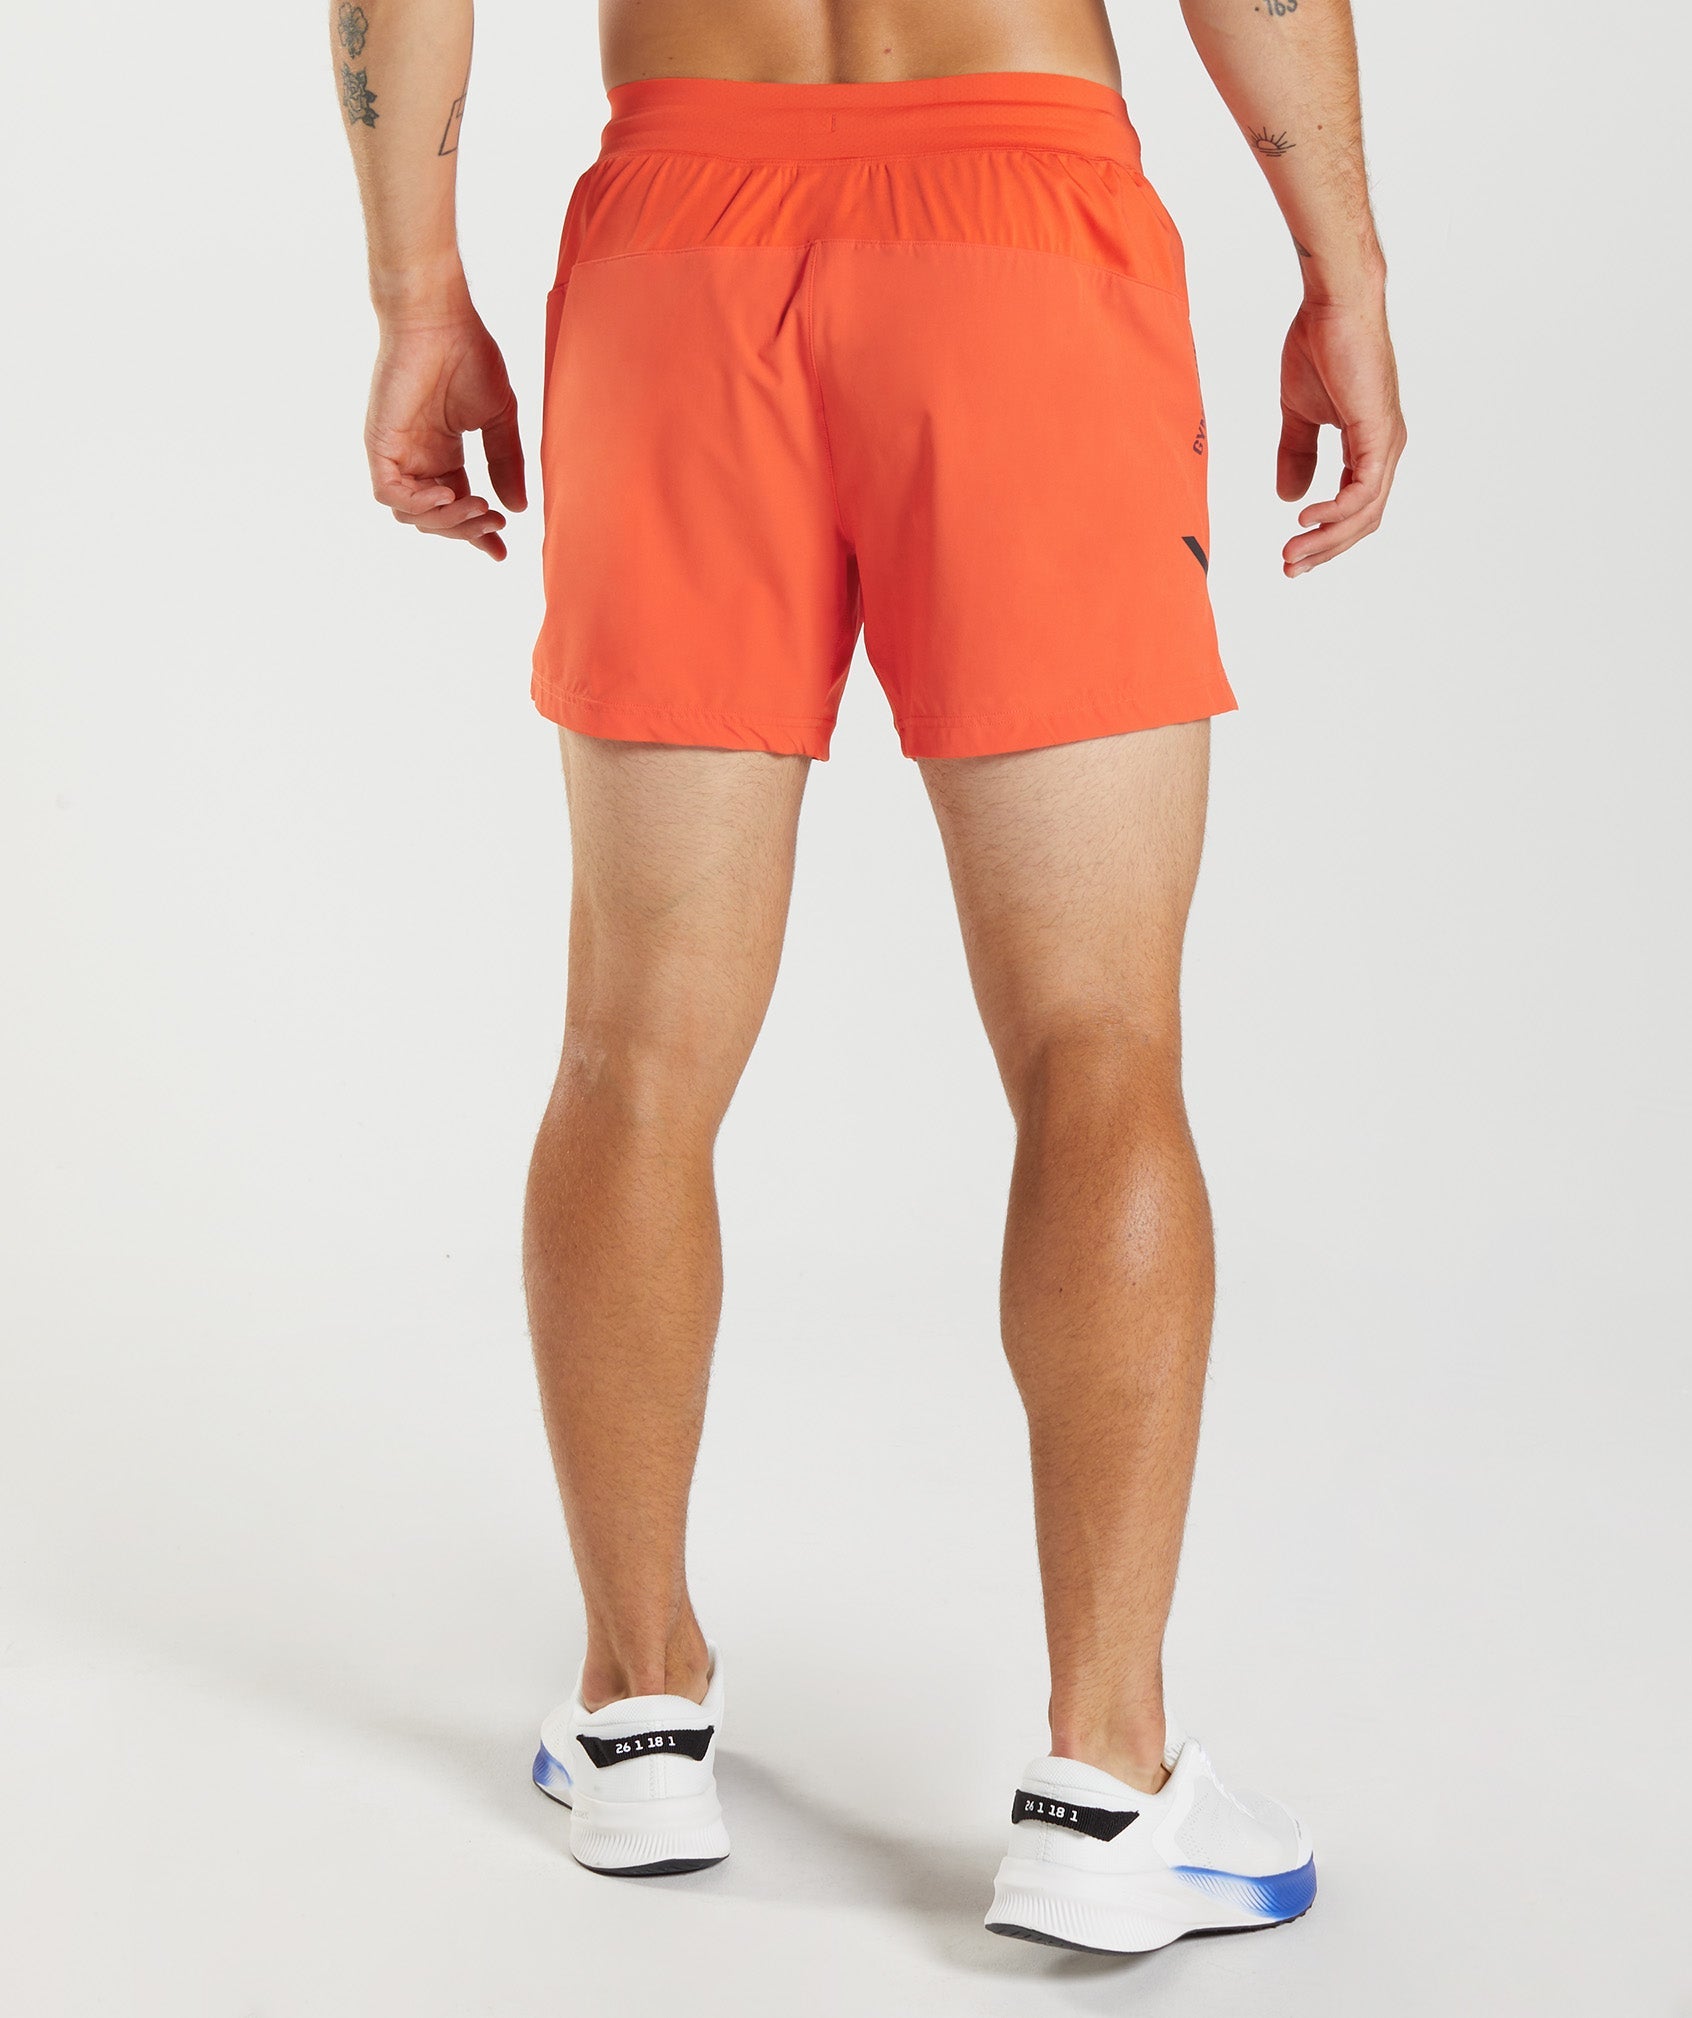 Apex 5" Perform Shorts in Pepper Red - view 3